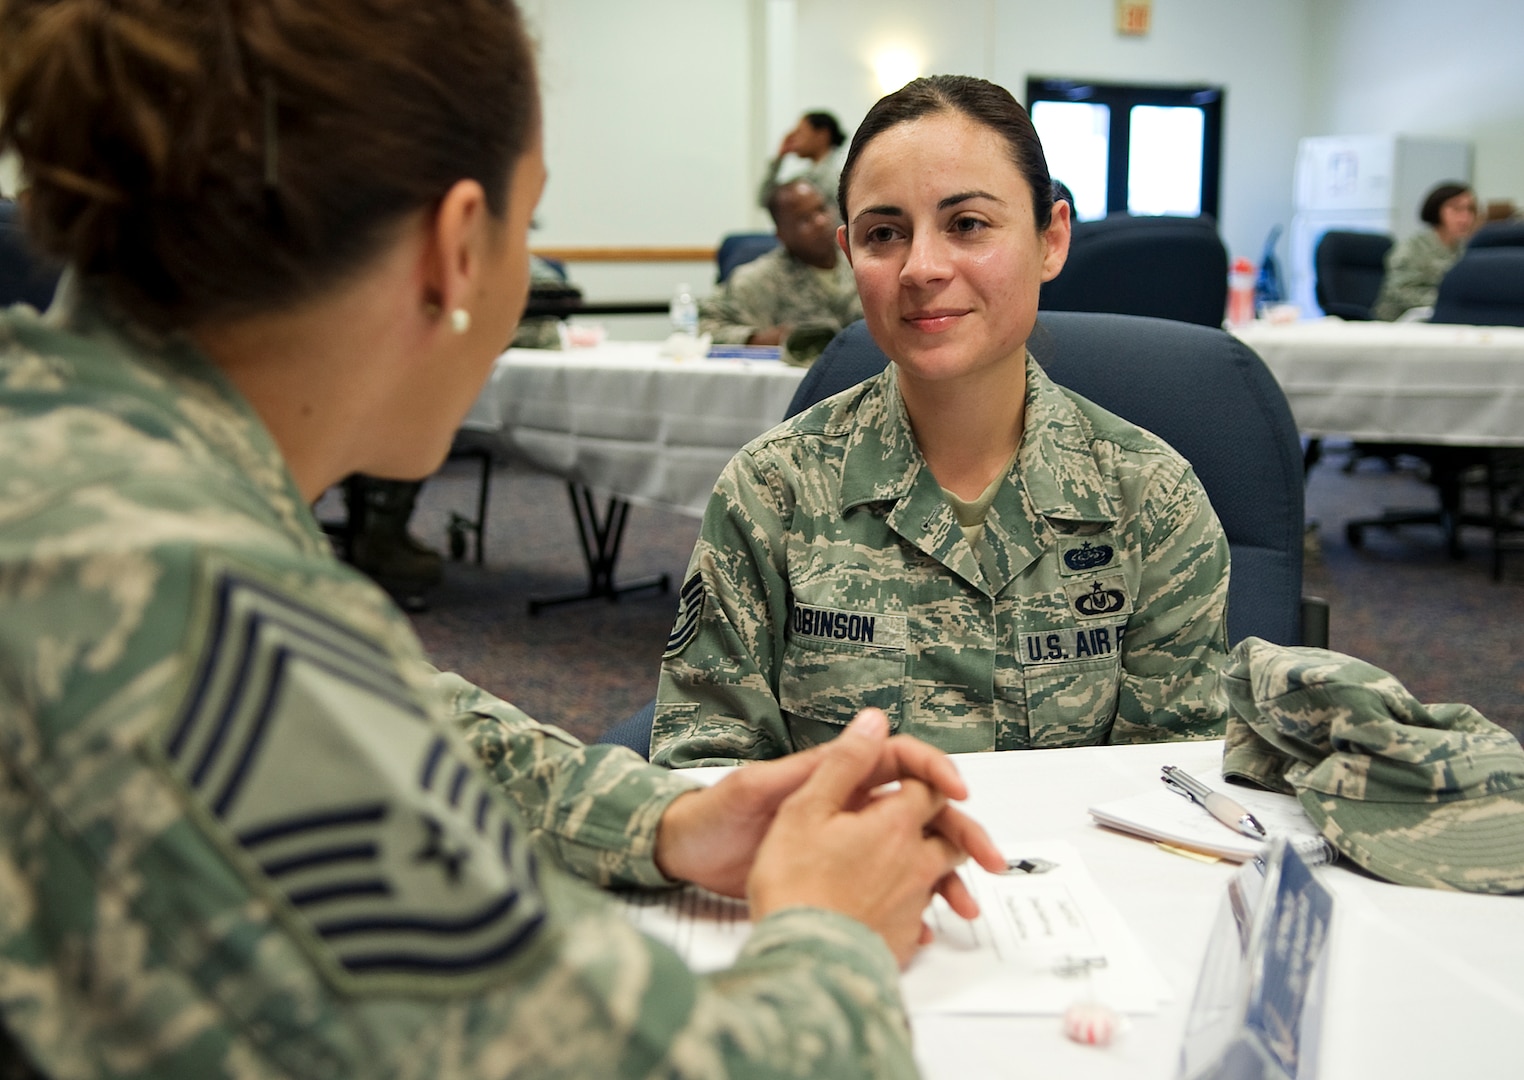 Tech Sgt. Jenny Robinson, Air Force Personnel Center executive services NCO in charge, discusses the future of the Air Force with Chief Master Sgt. Shannon Parker, AFPC Skills Management Branch chief, at the speed mentoring seminar hosted by the Rising 5/6 April 25 at Joint Base San Antonio-Randolph. (U.S. Air Force photo by Benjamin Faske)